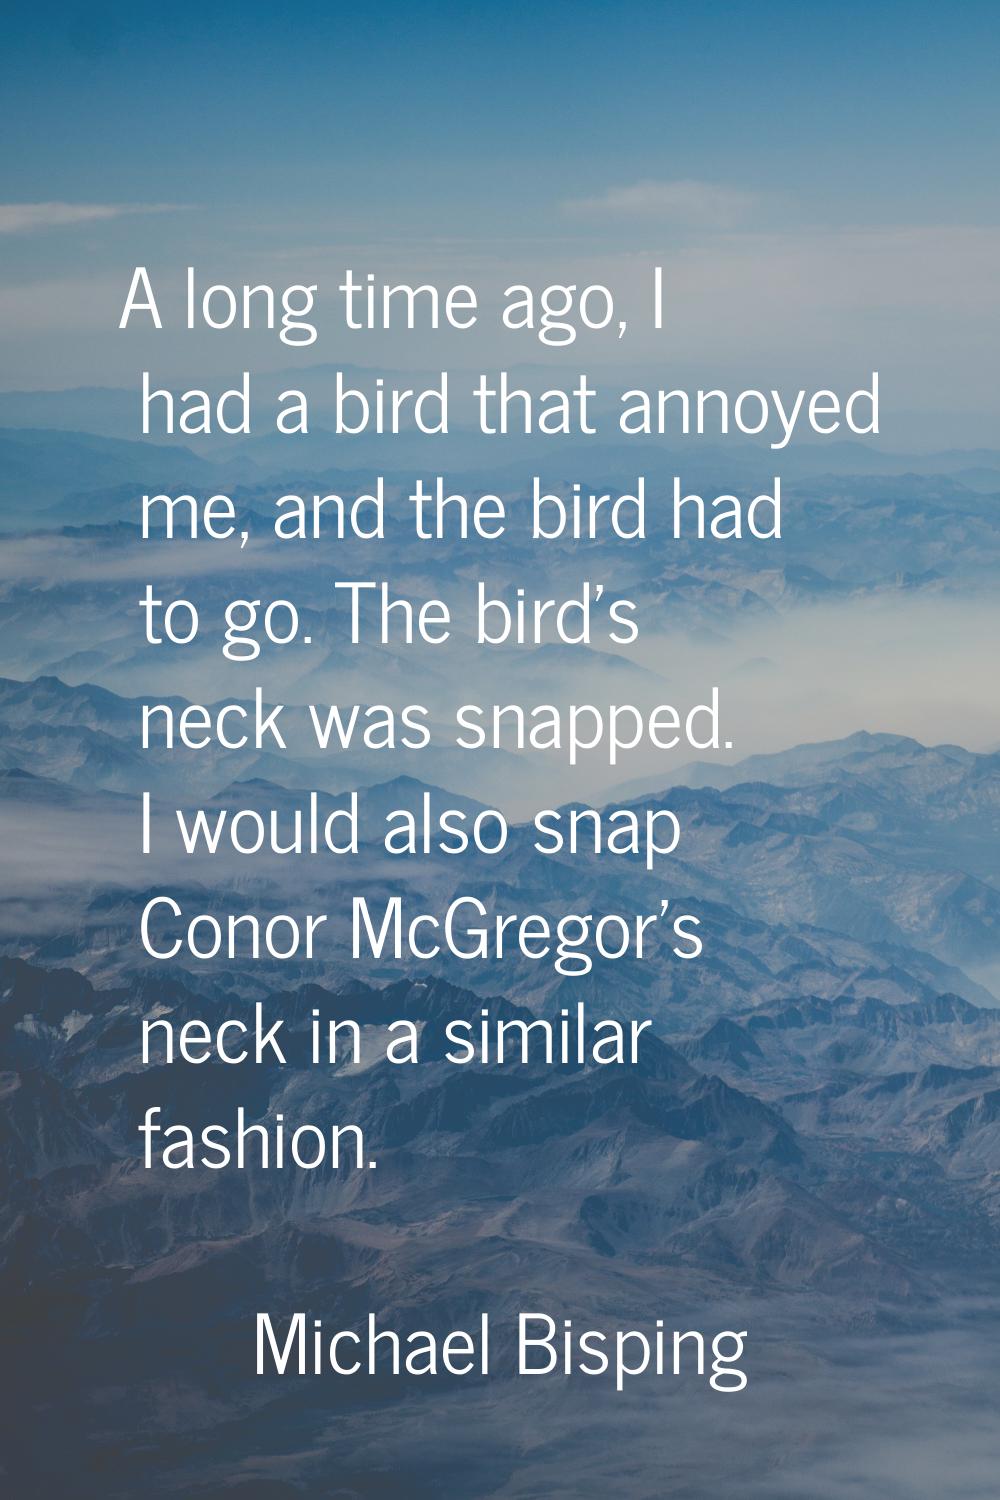 A long time ago, I had a bird that annoyed me, and the bird had to go. The bird's neck was snapped.